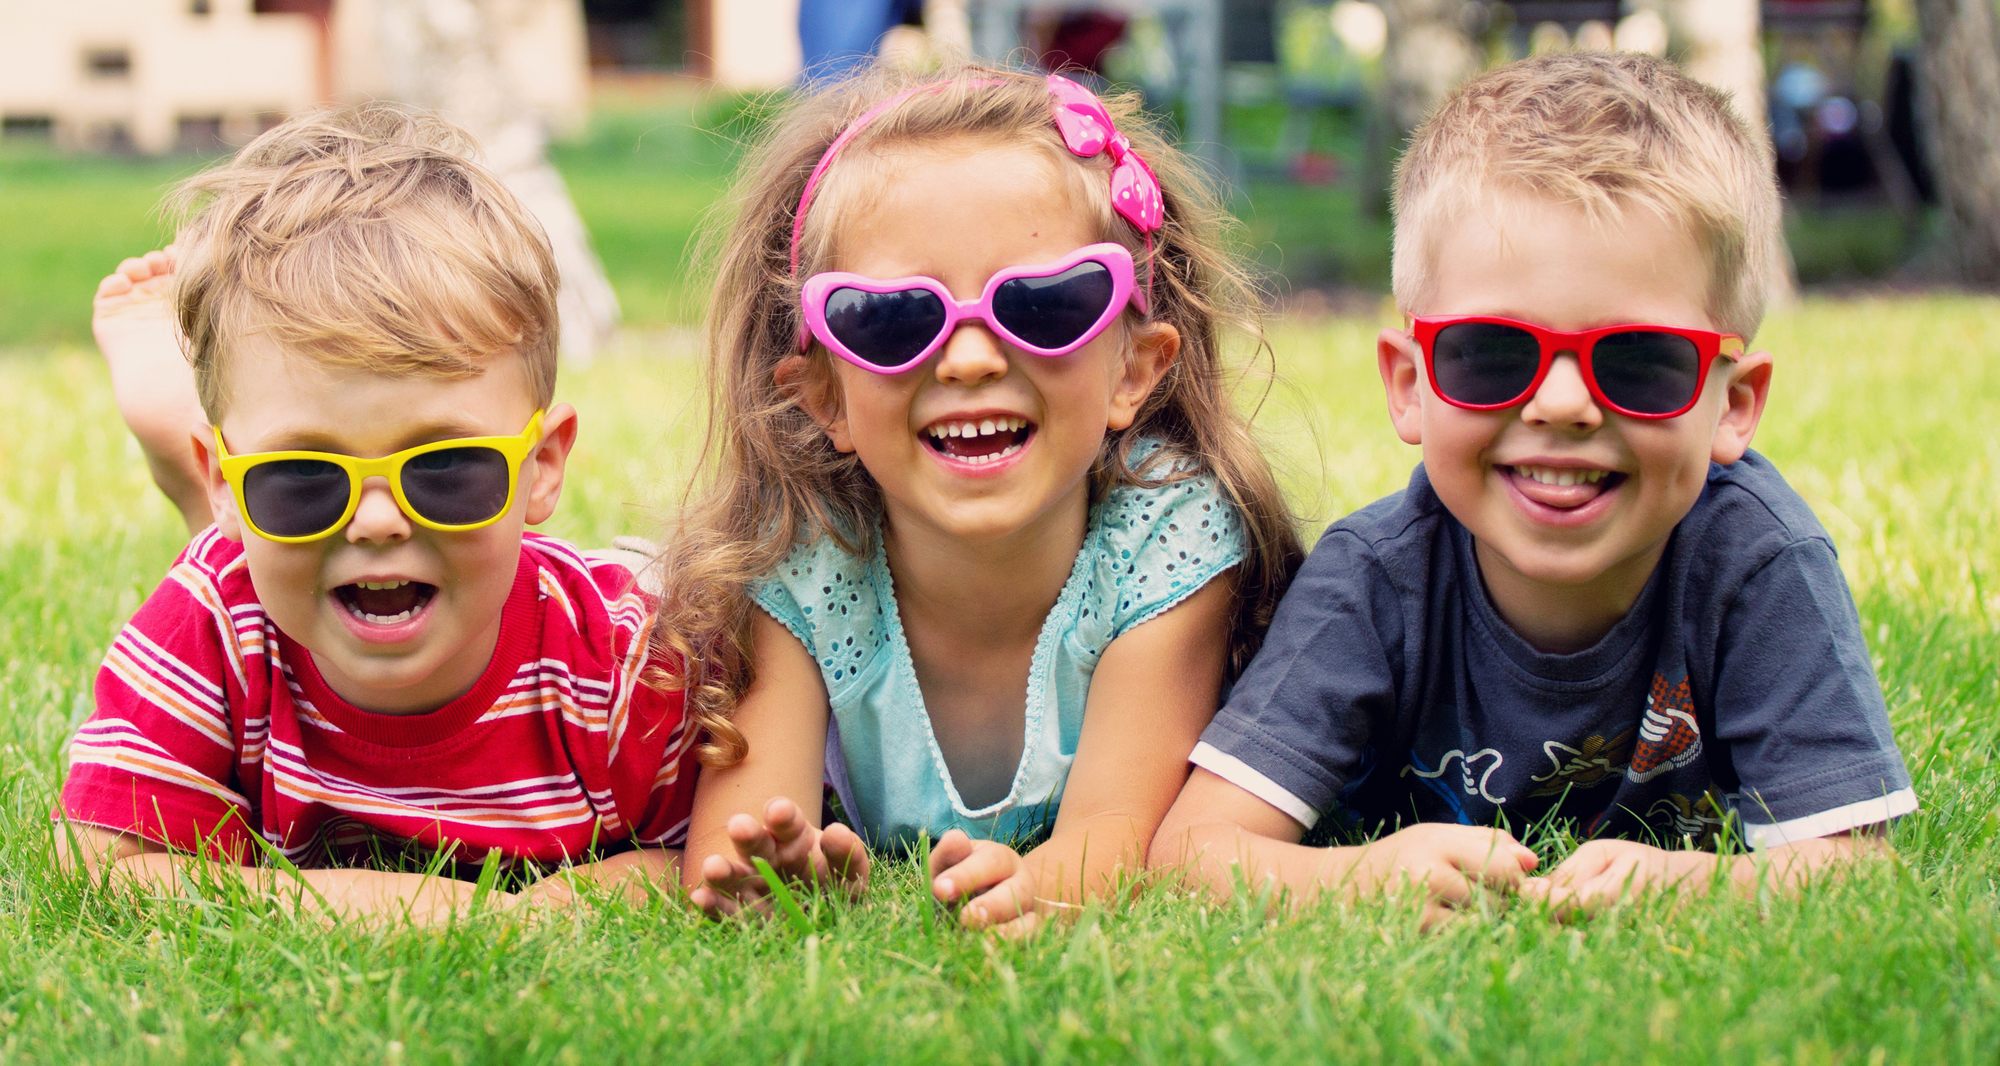 4 Fun Backyard Games to Play with Your Kids This  Summer